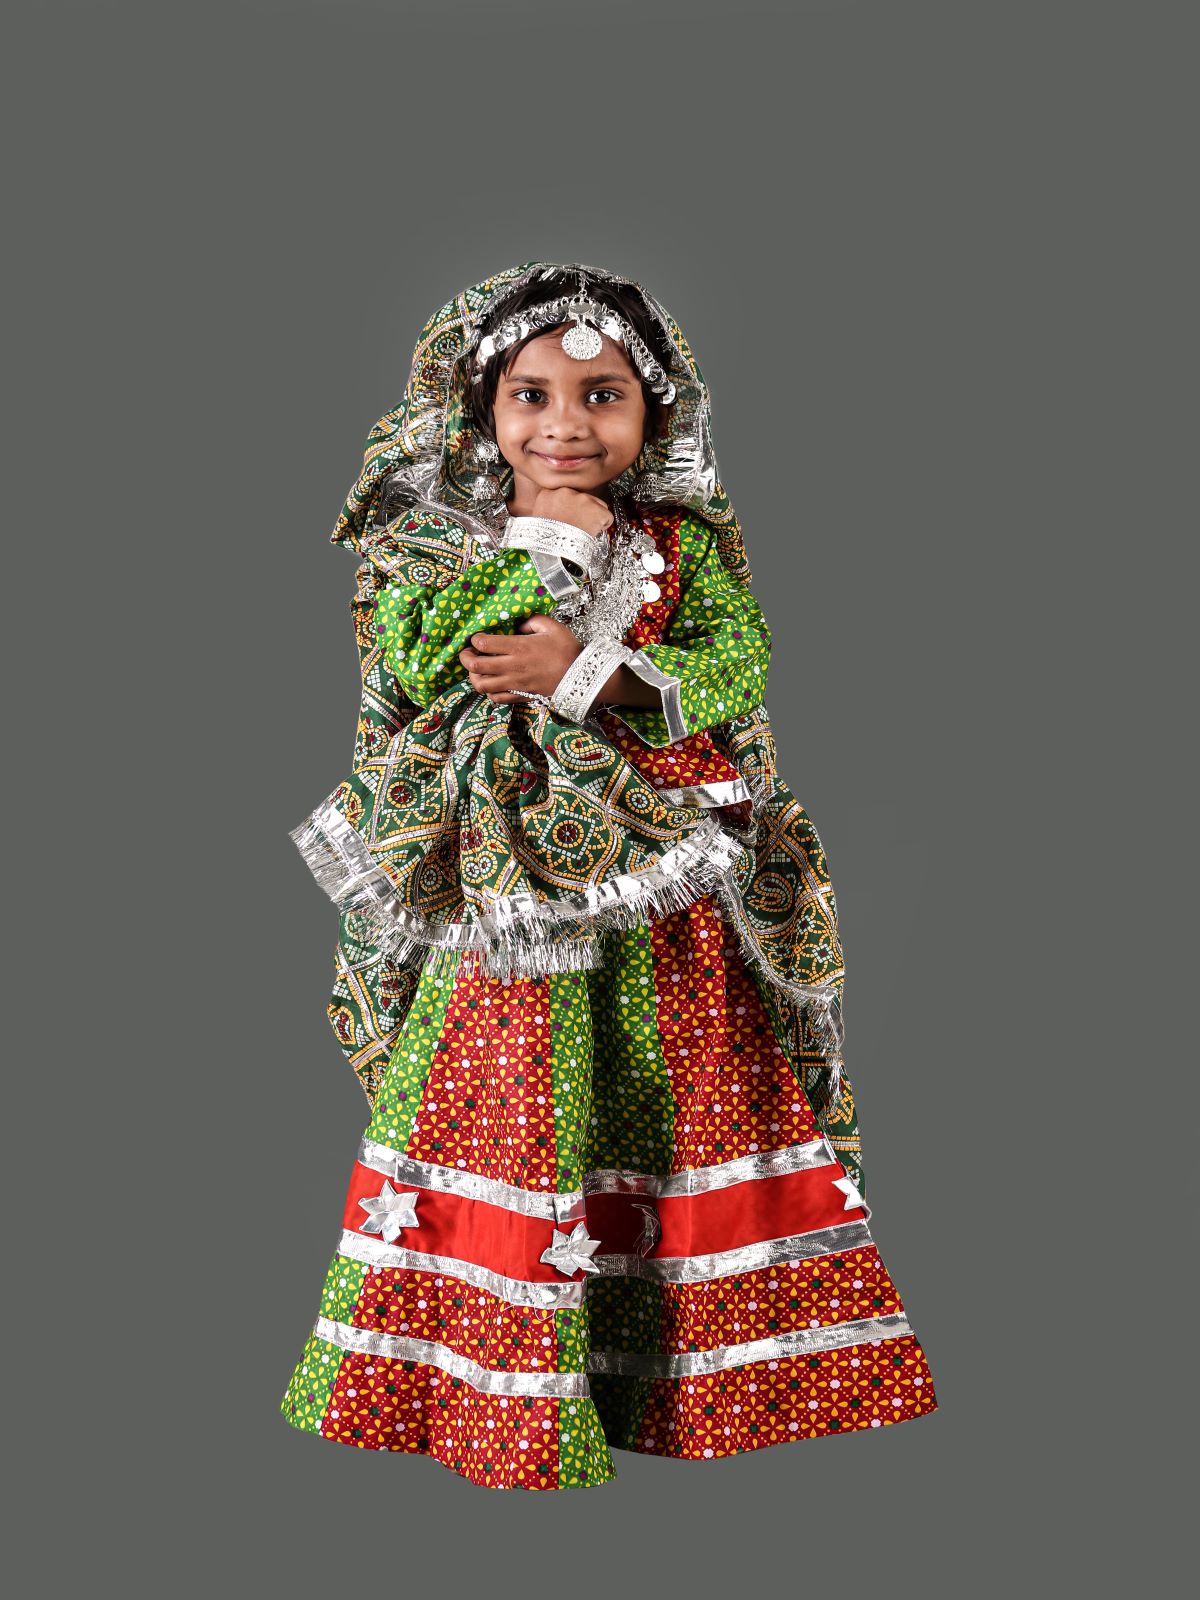 Indian Girl Wearing Traditional Rajasthani Dress, 58% OFF